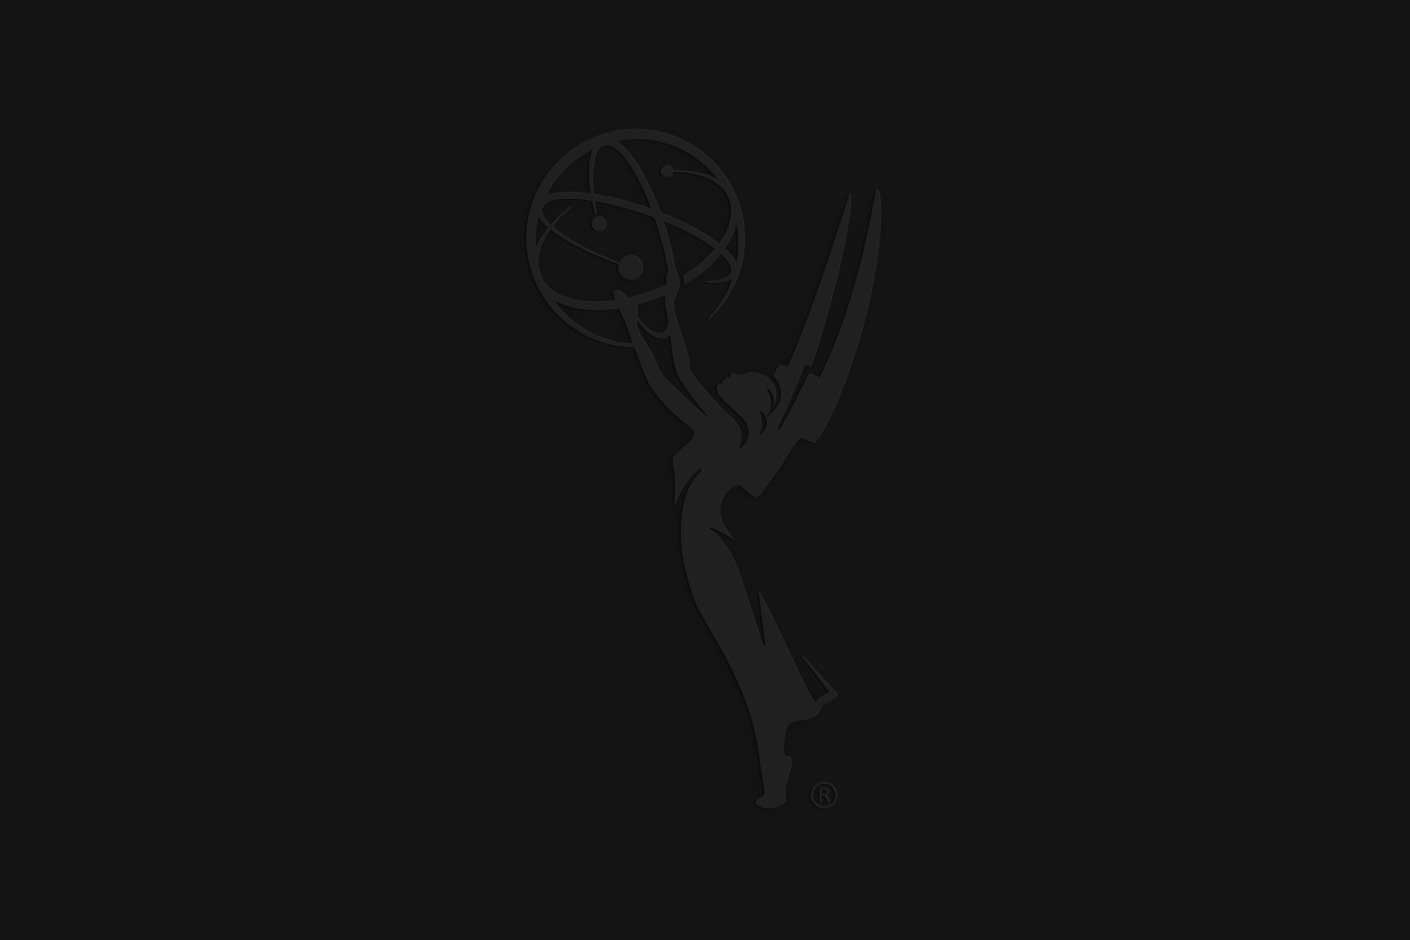 2008 - 60th Emmys Program Cover